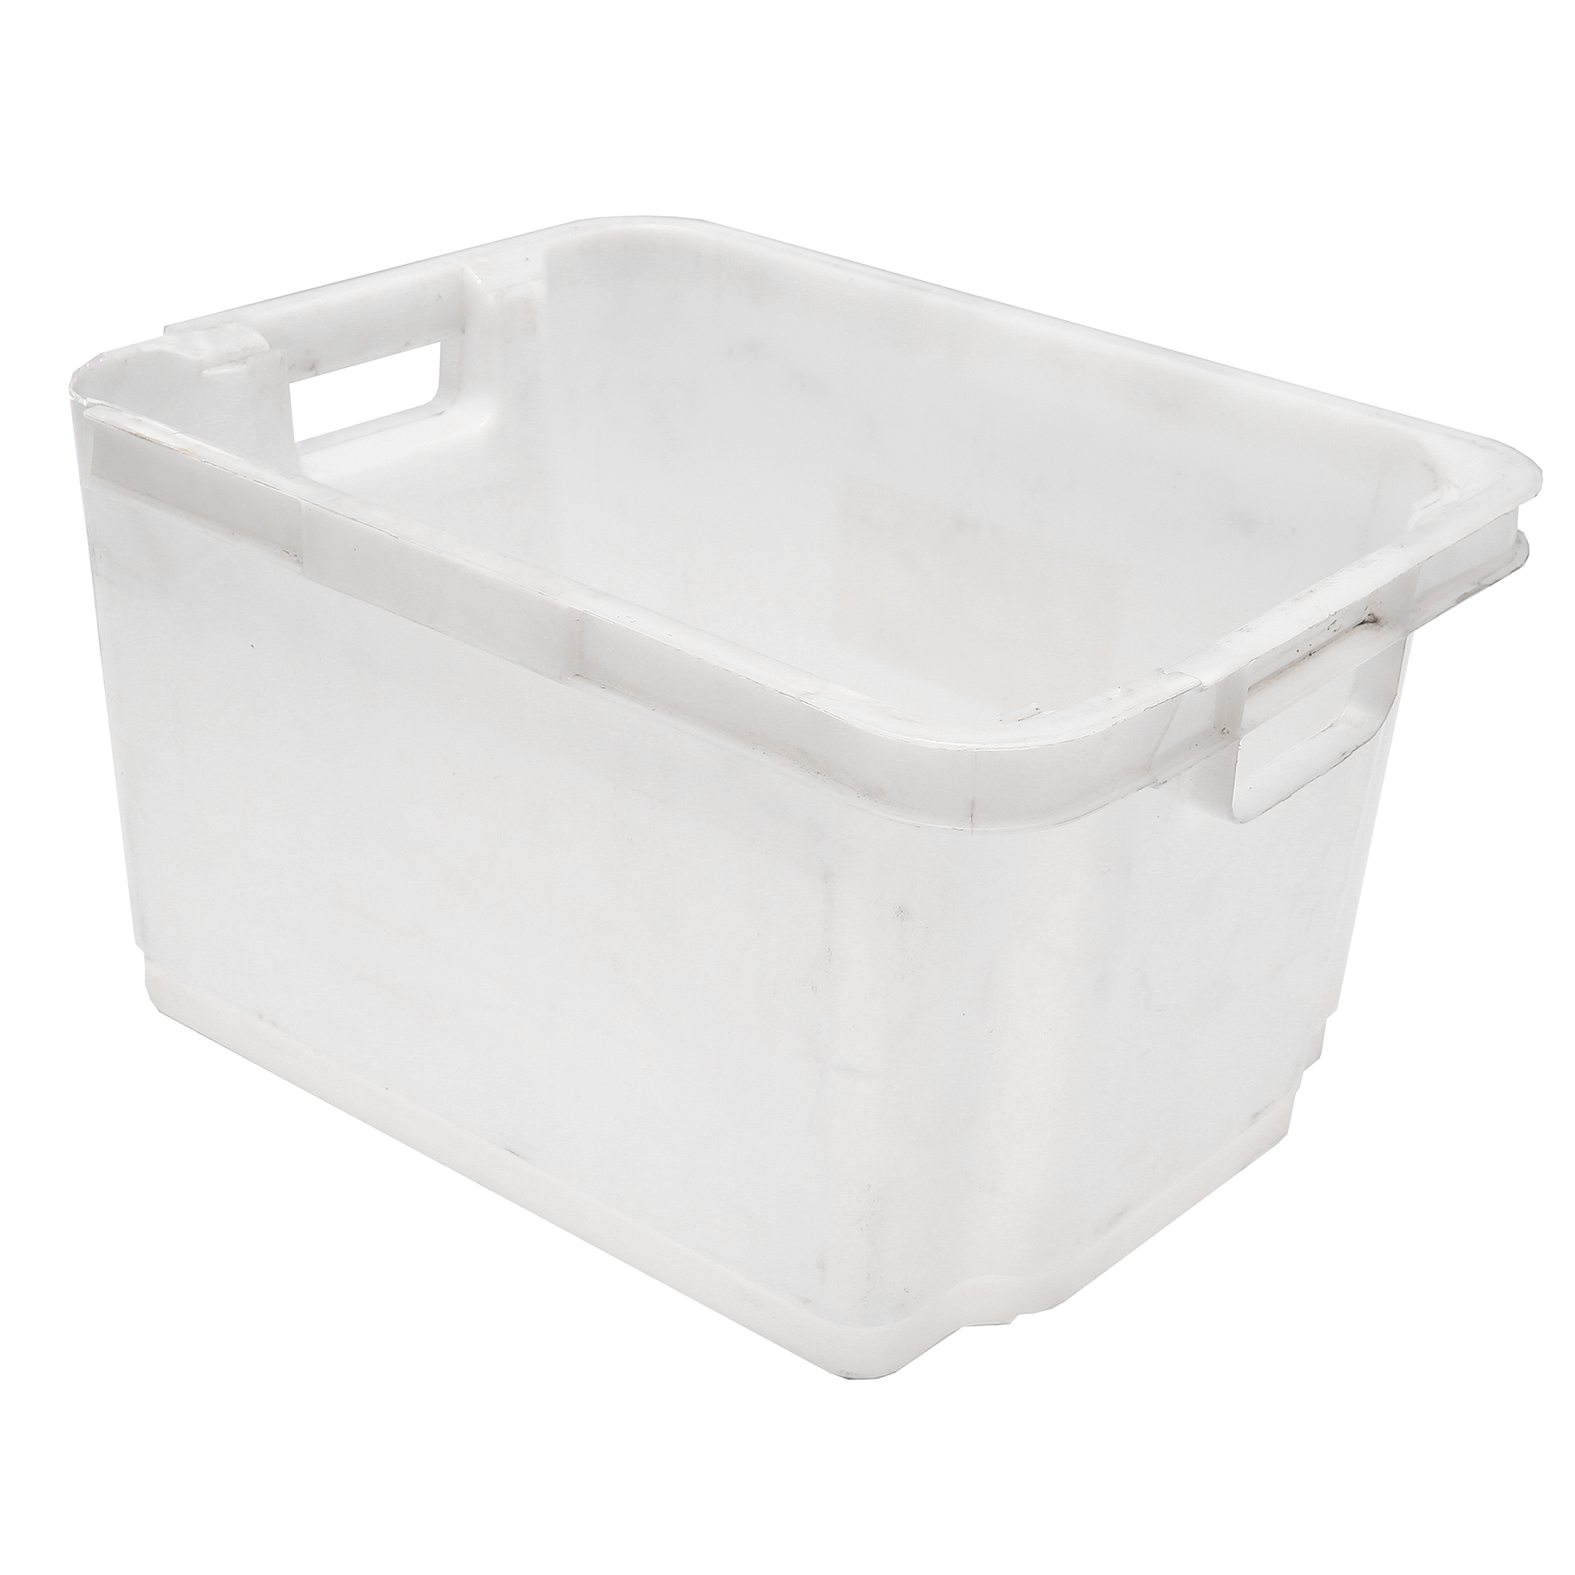 Capacity 25 Litres. Multi-Purpose. Easy To Move Around. Easily Accessible. Easily Stacked. Perfect For Pallets. Organize Your Garage, House, Office.